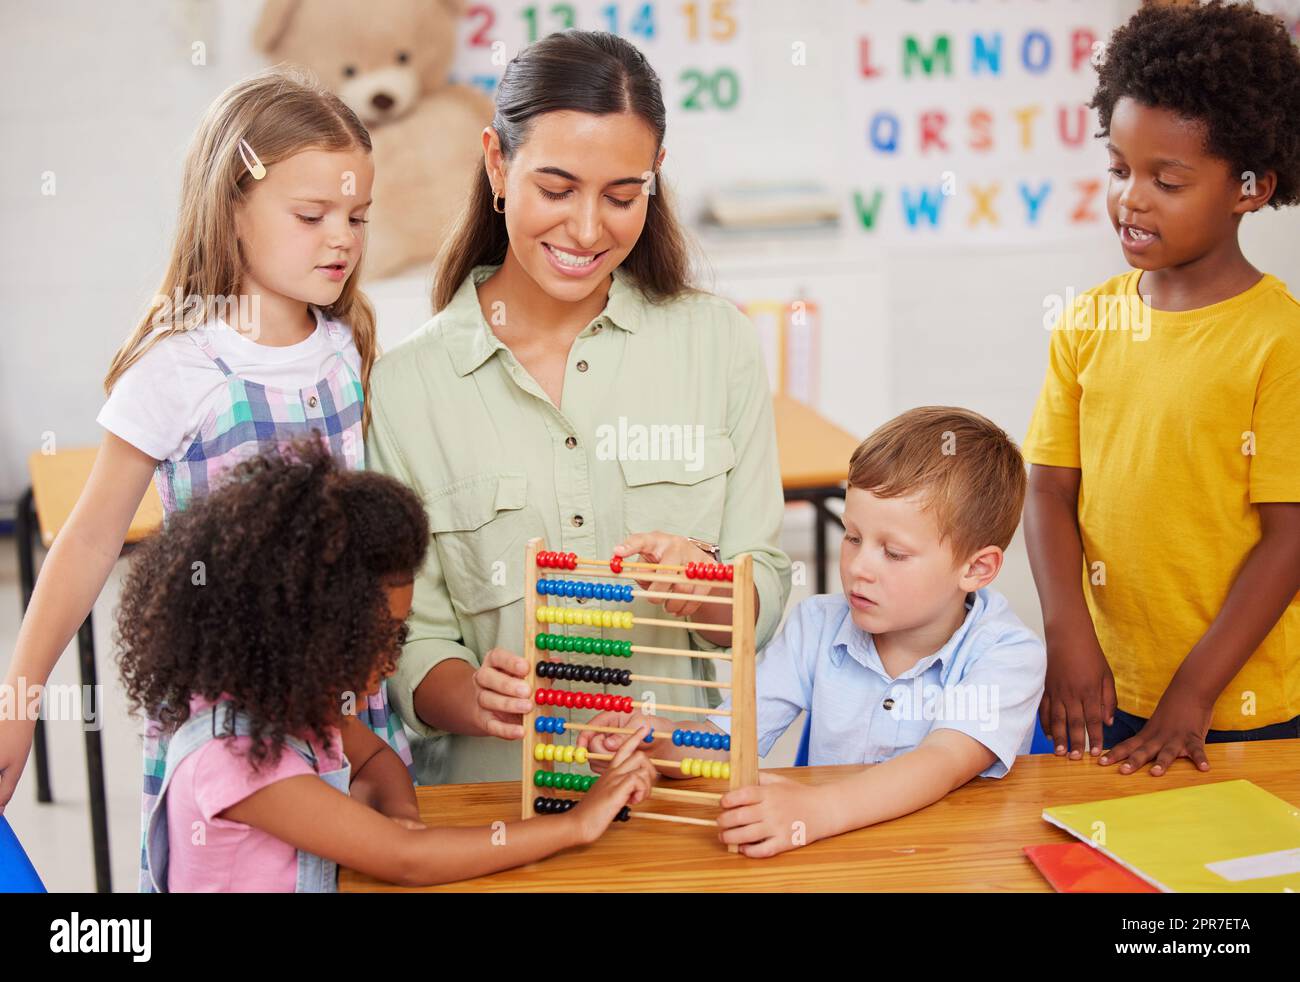 Freedom of play gives children the chance to expand their curiosity. Shot of a young woman teaching a class of preschool children. Stock Photo